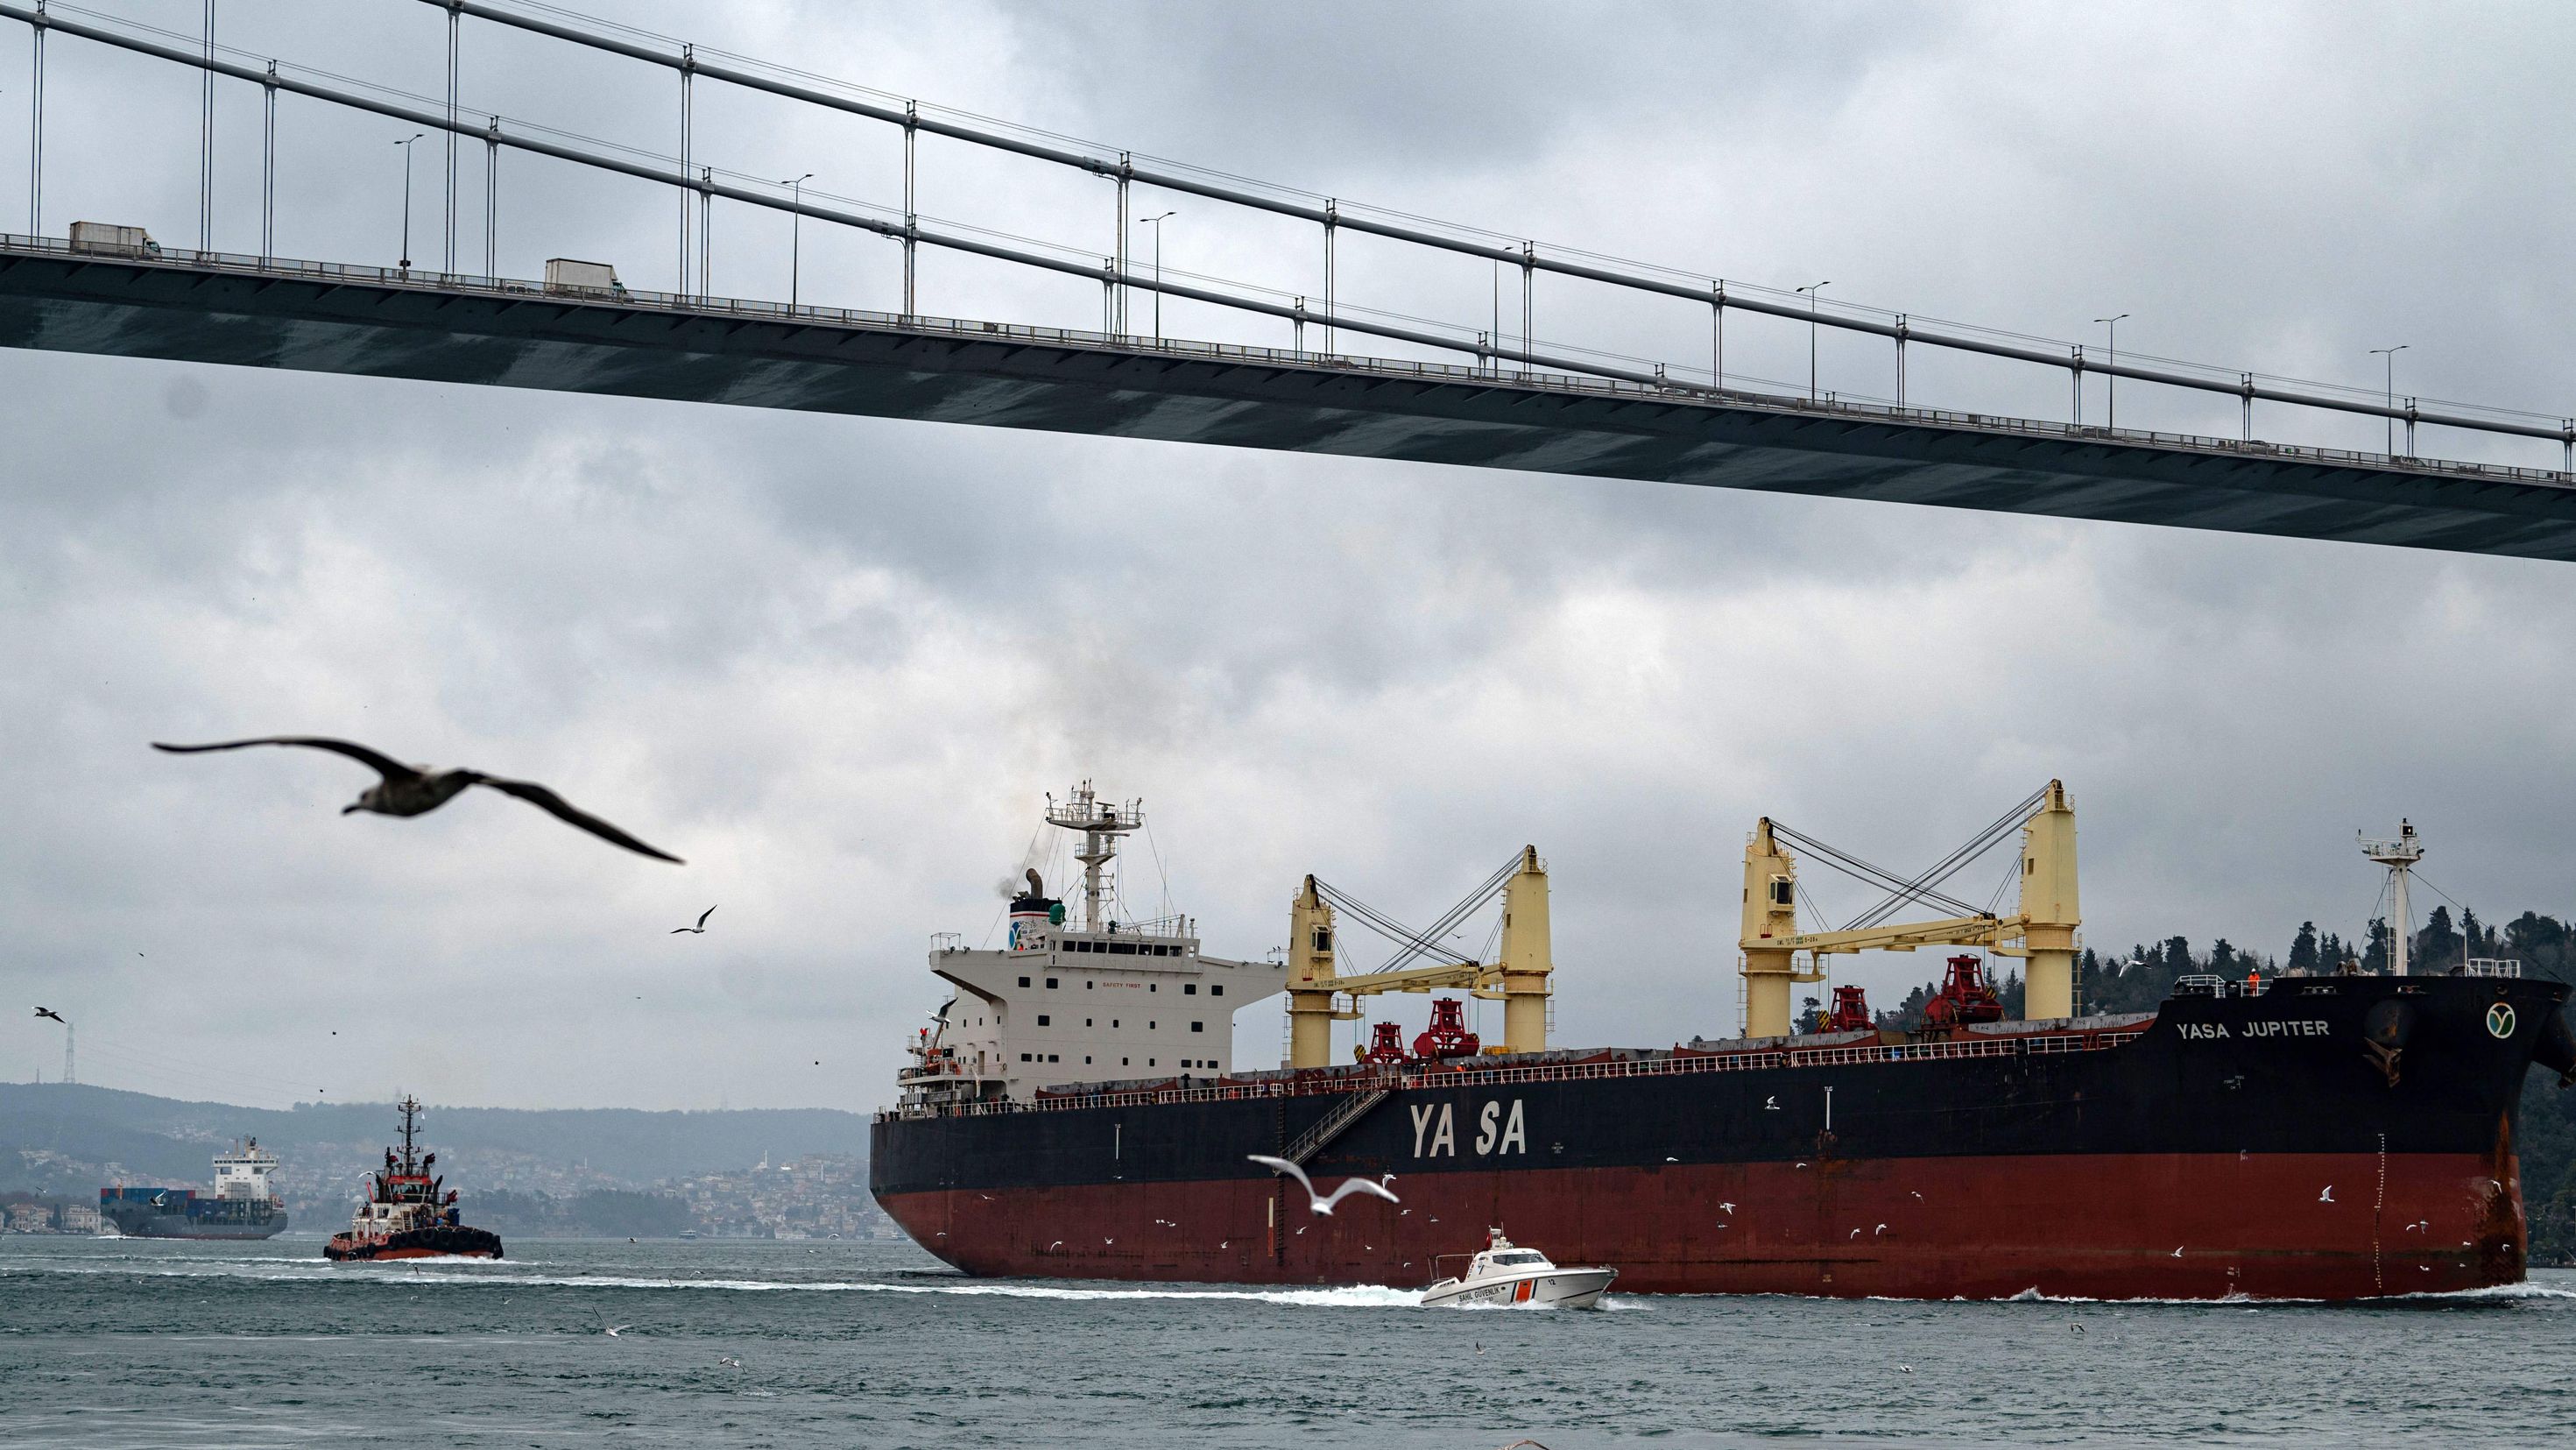 The Marshall Islands-flagged Turkish-owned Yasa Jupiter ship, which was hit by a missile off the coast of Ukraine's port city Odessa, sails on the Bosphorus in Istanbul, Turkey, on February 25.